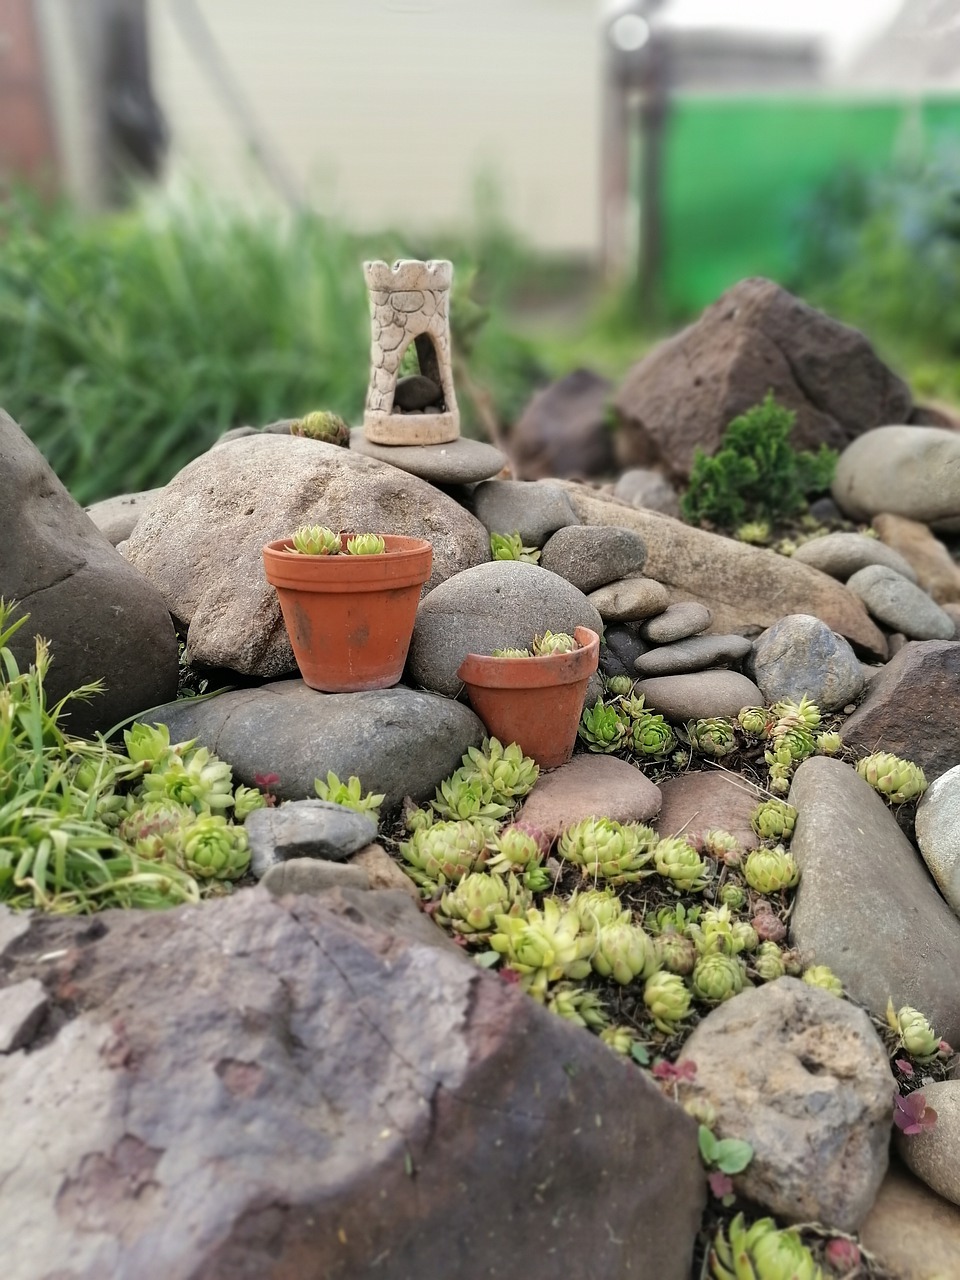 What materials are used to make a rockery?